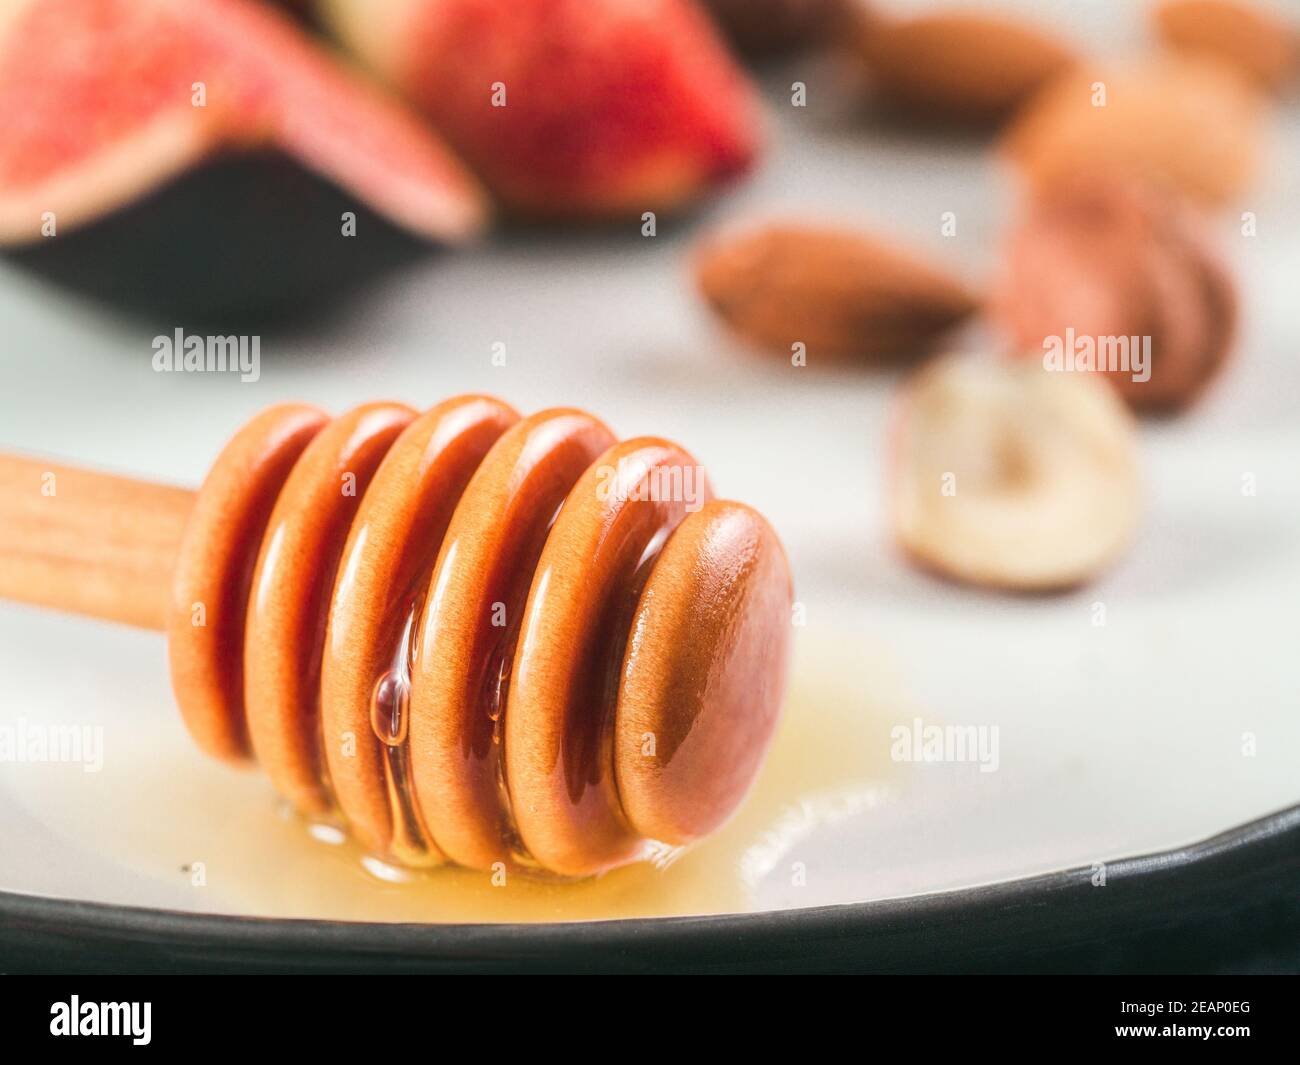 honey dipper and honey drops on plate close up Stock Photo